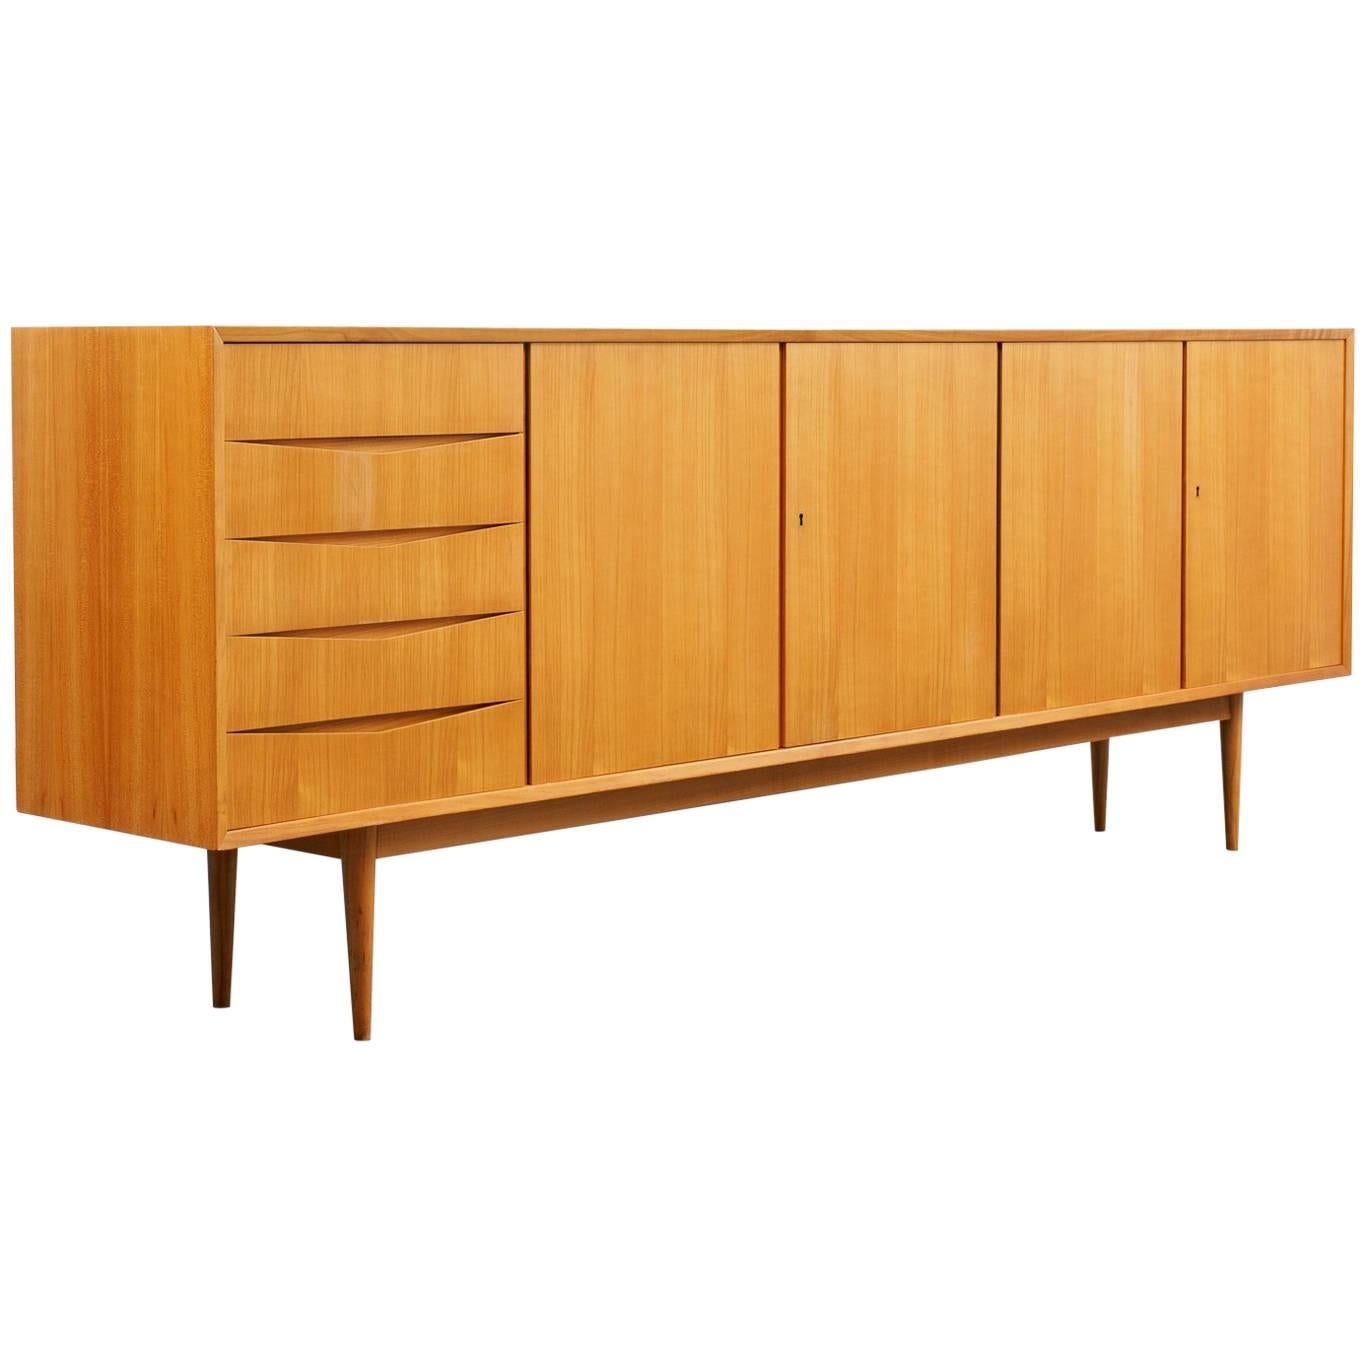 Large 1960s Cherrywood Sideboard For Sale